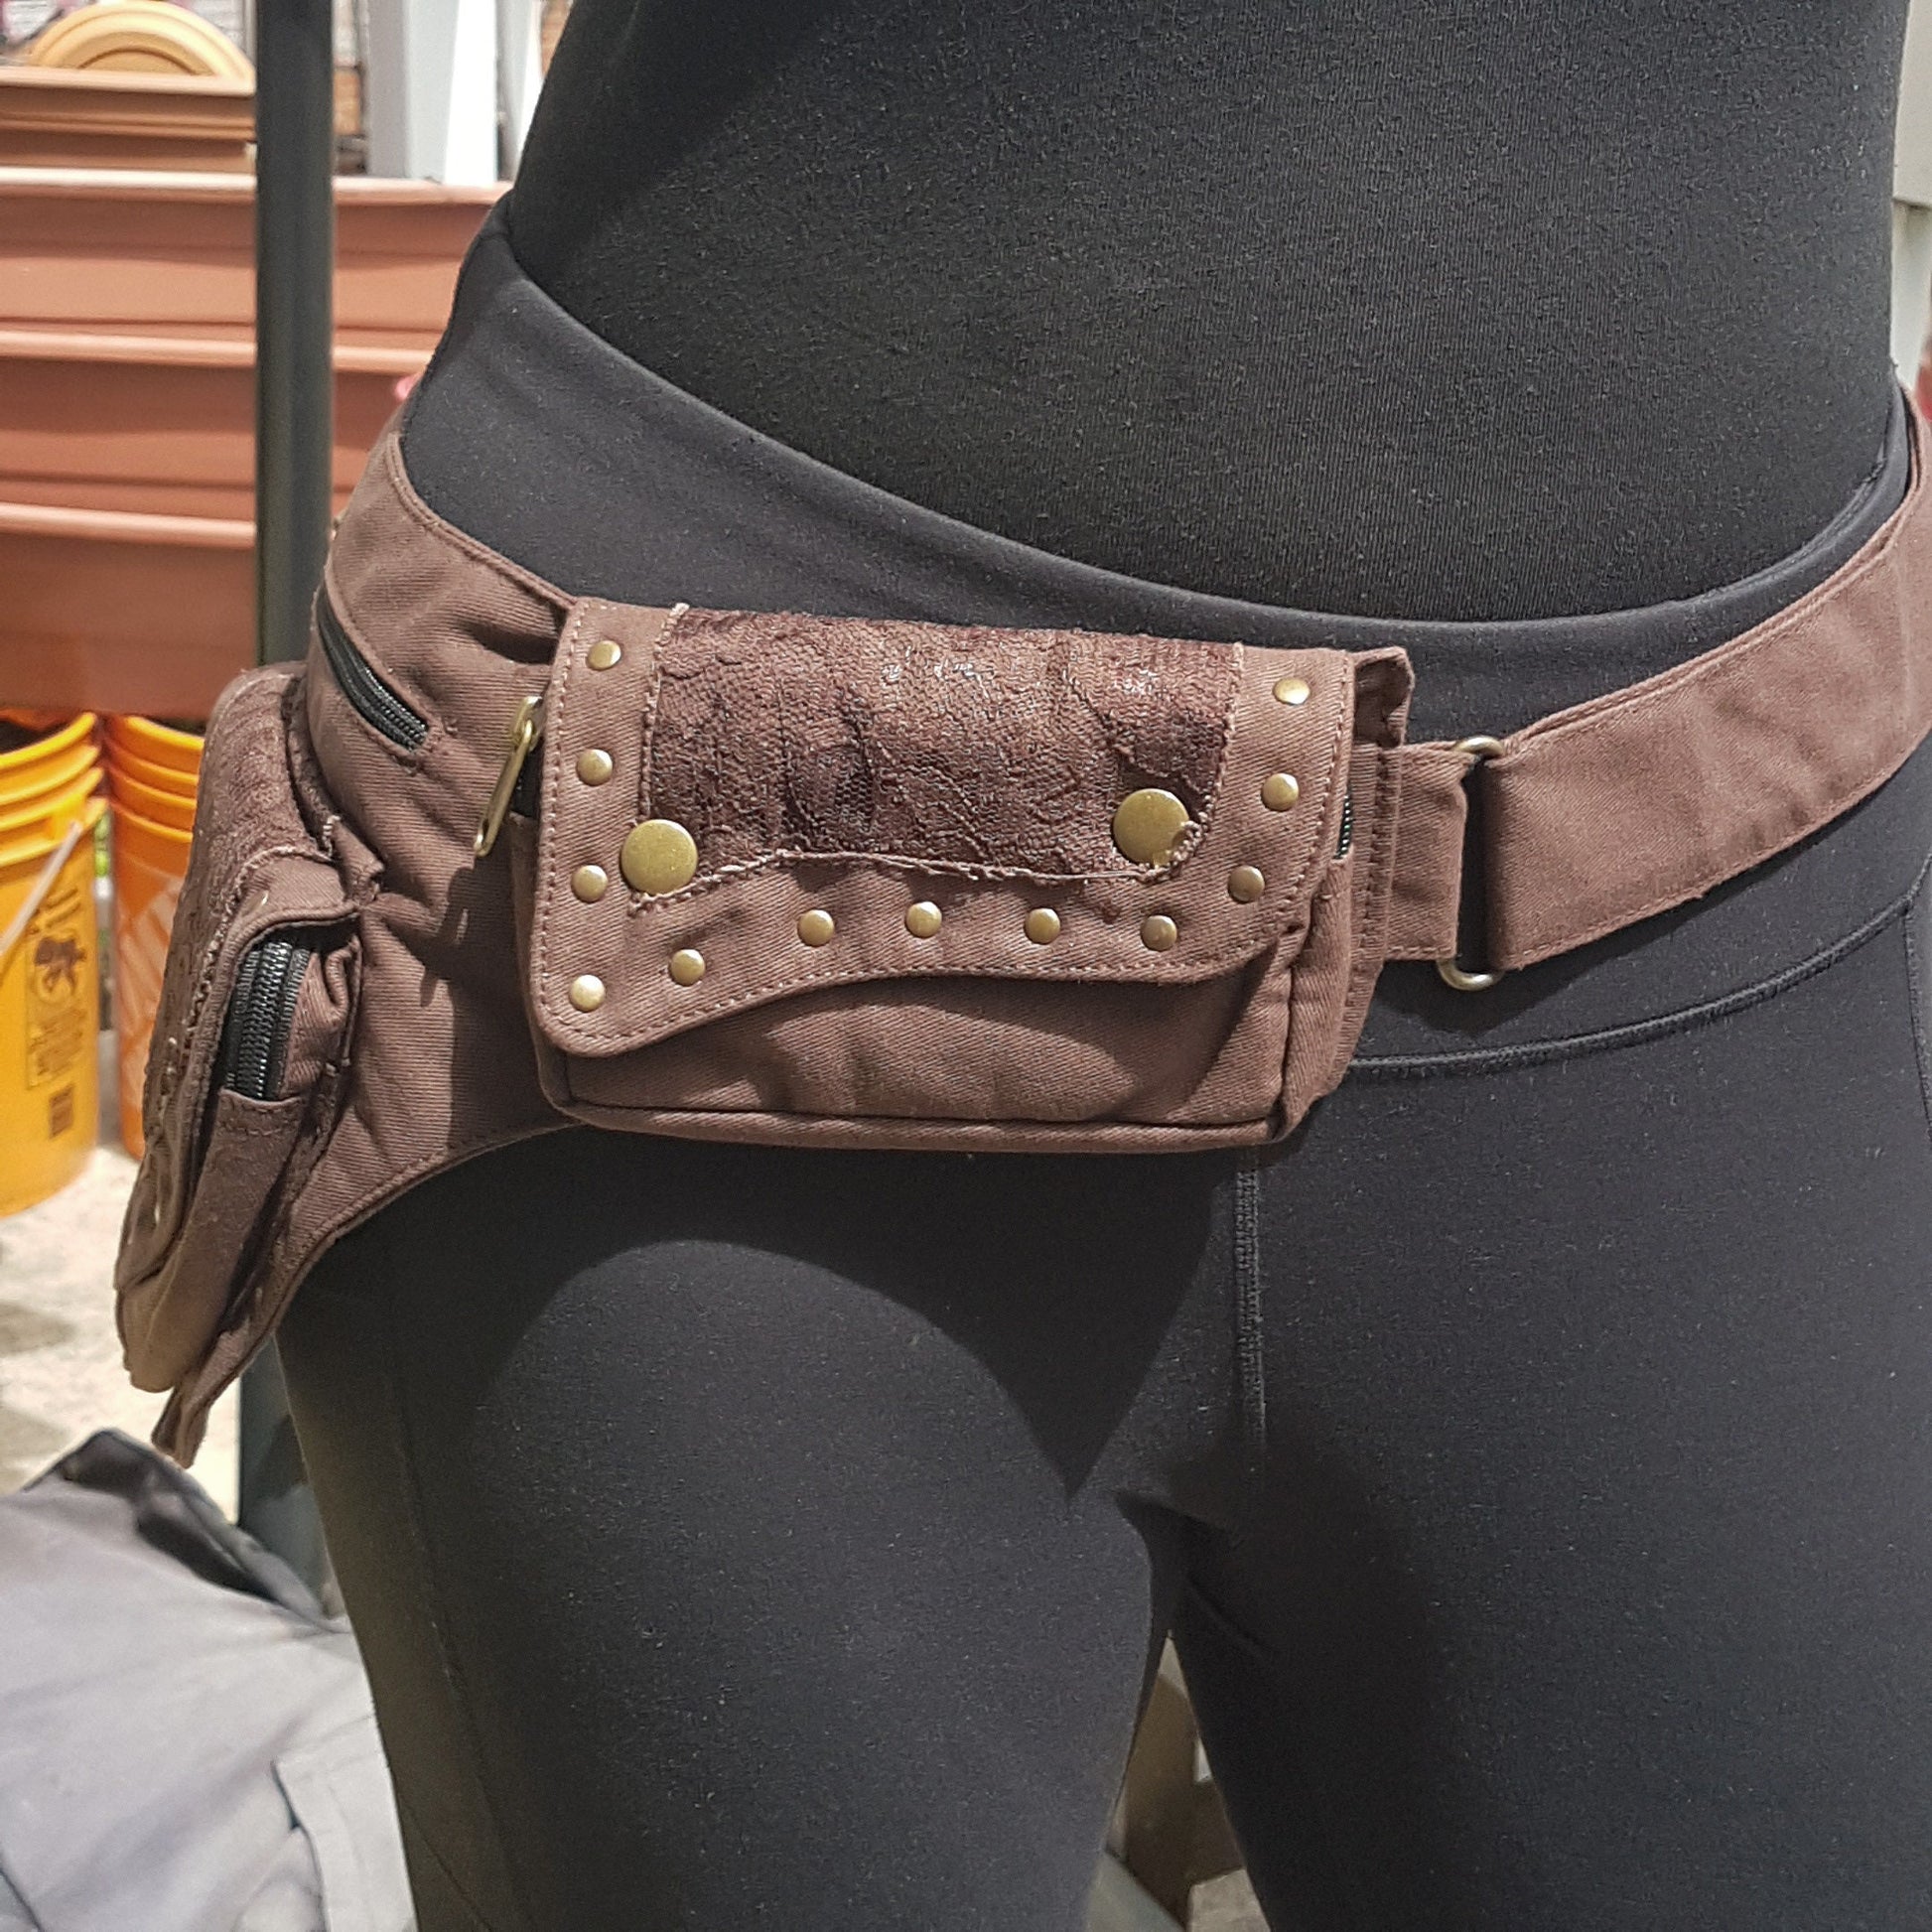 Utility belt with 5 pockets. Festival bum bag with a gender neutral design. Adjustable to 48 inches. Fanny pack money belt for travel & fun. - Vintage India Ca